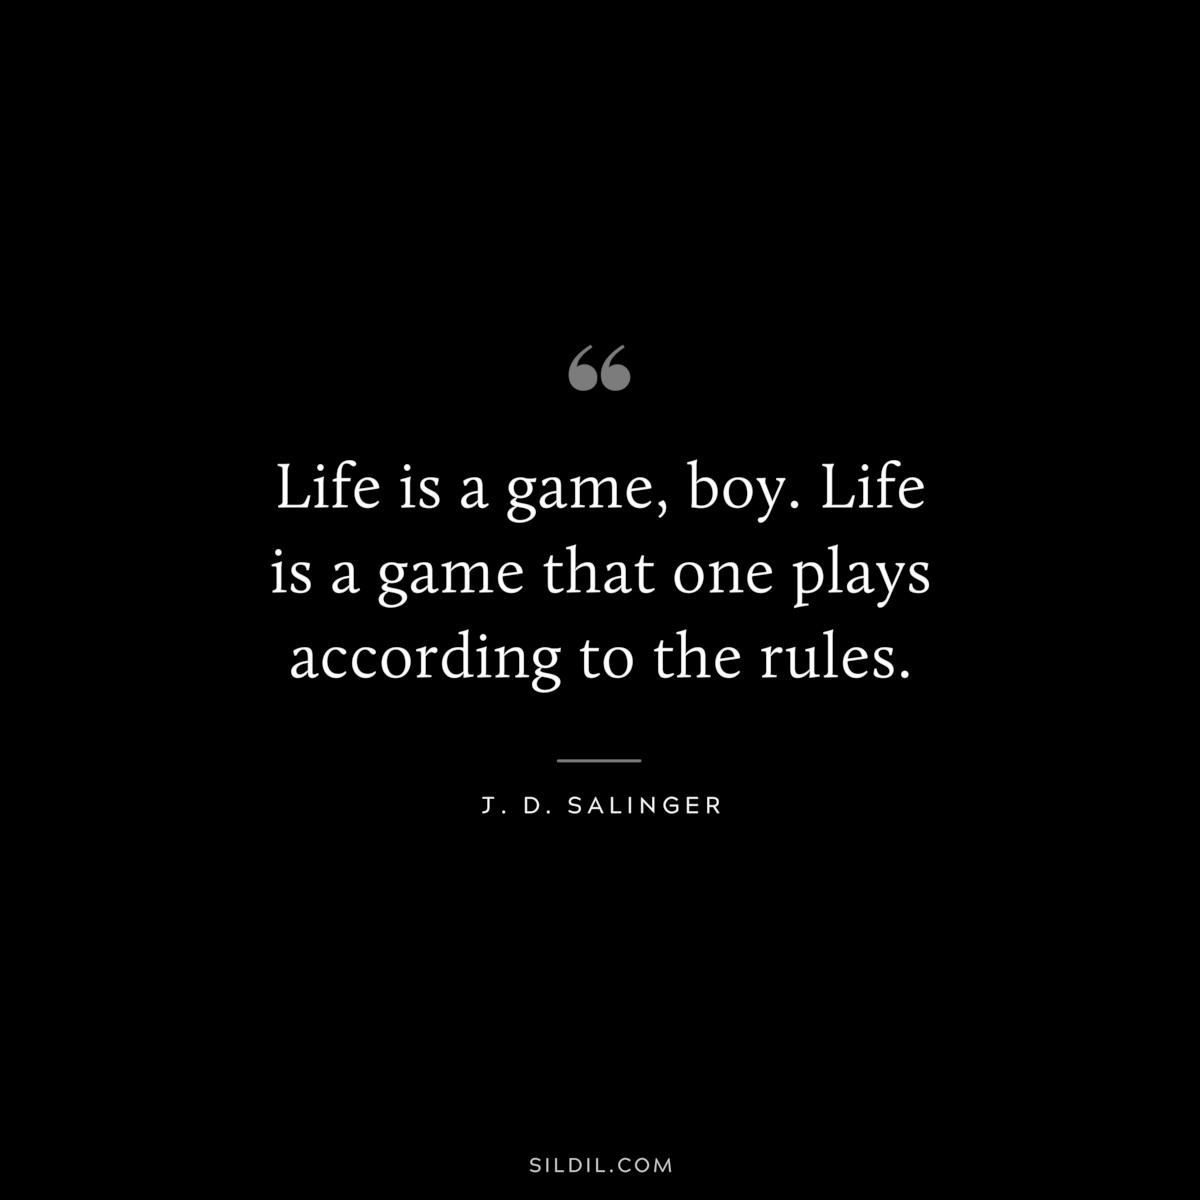 Life is a game, boy. Life is a game that one plays according to the rules. — J. D. Salinger